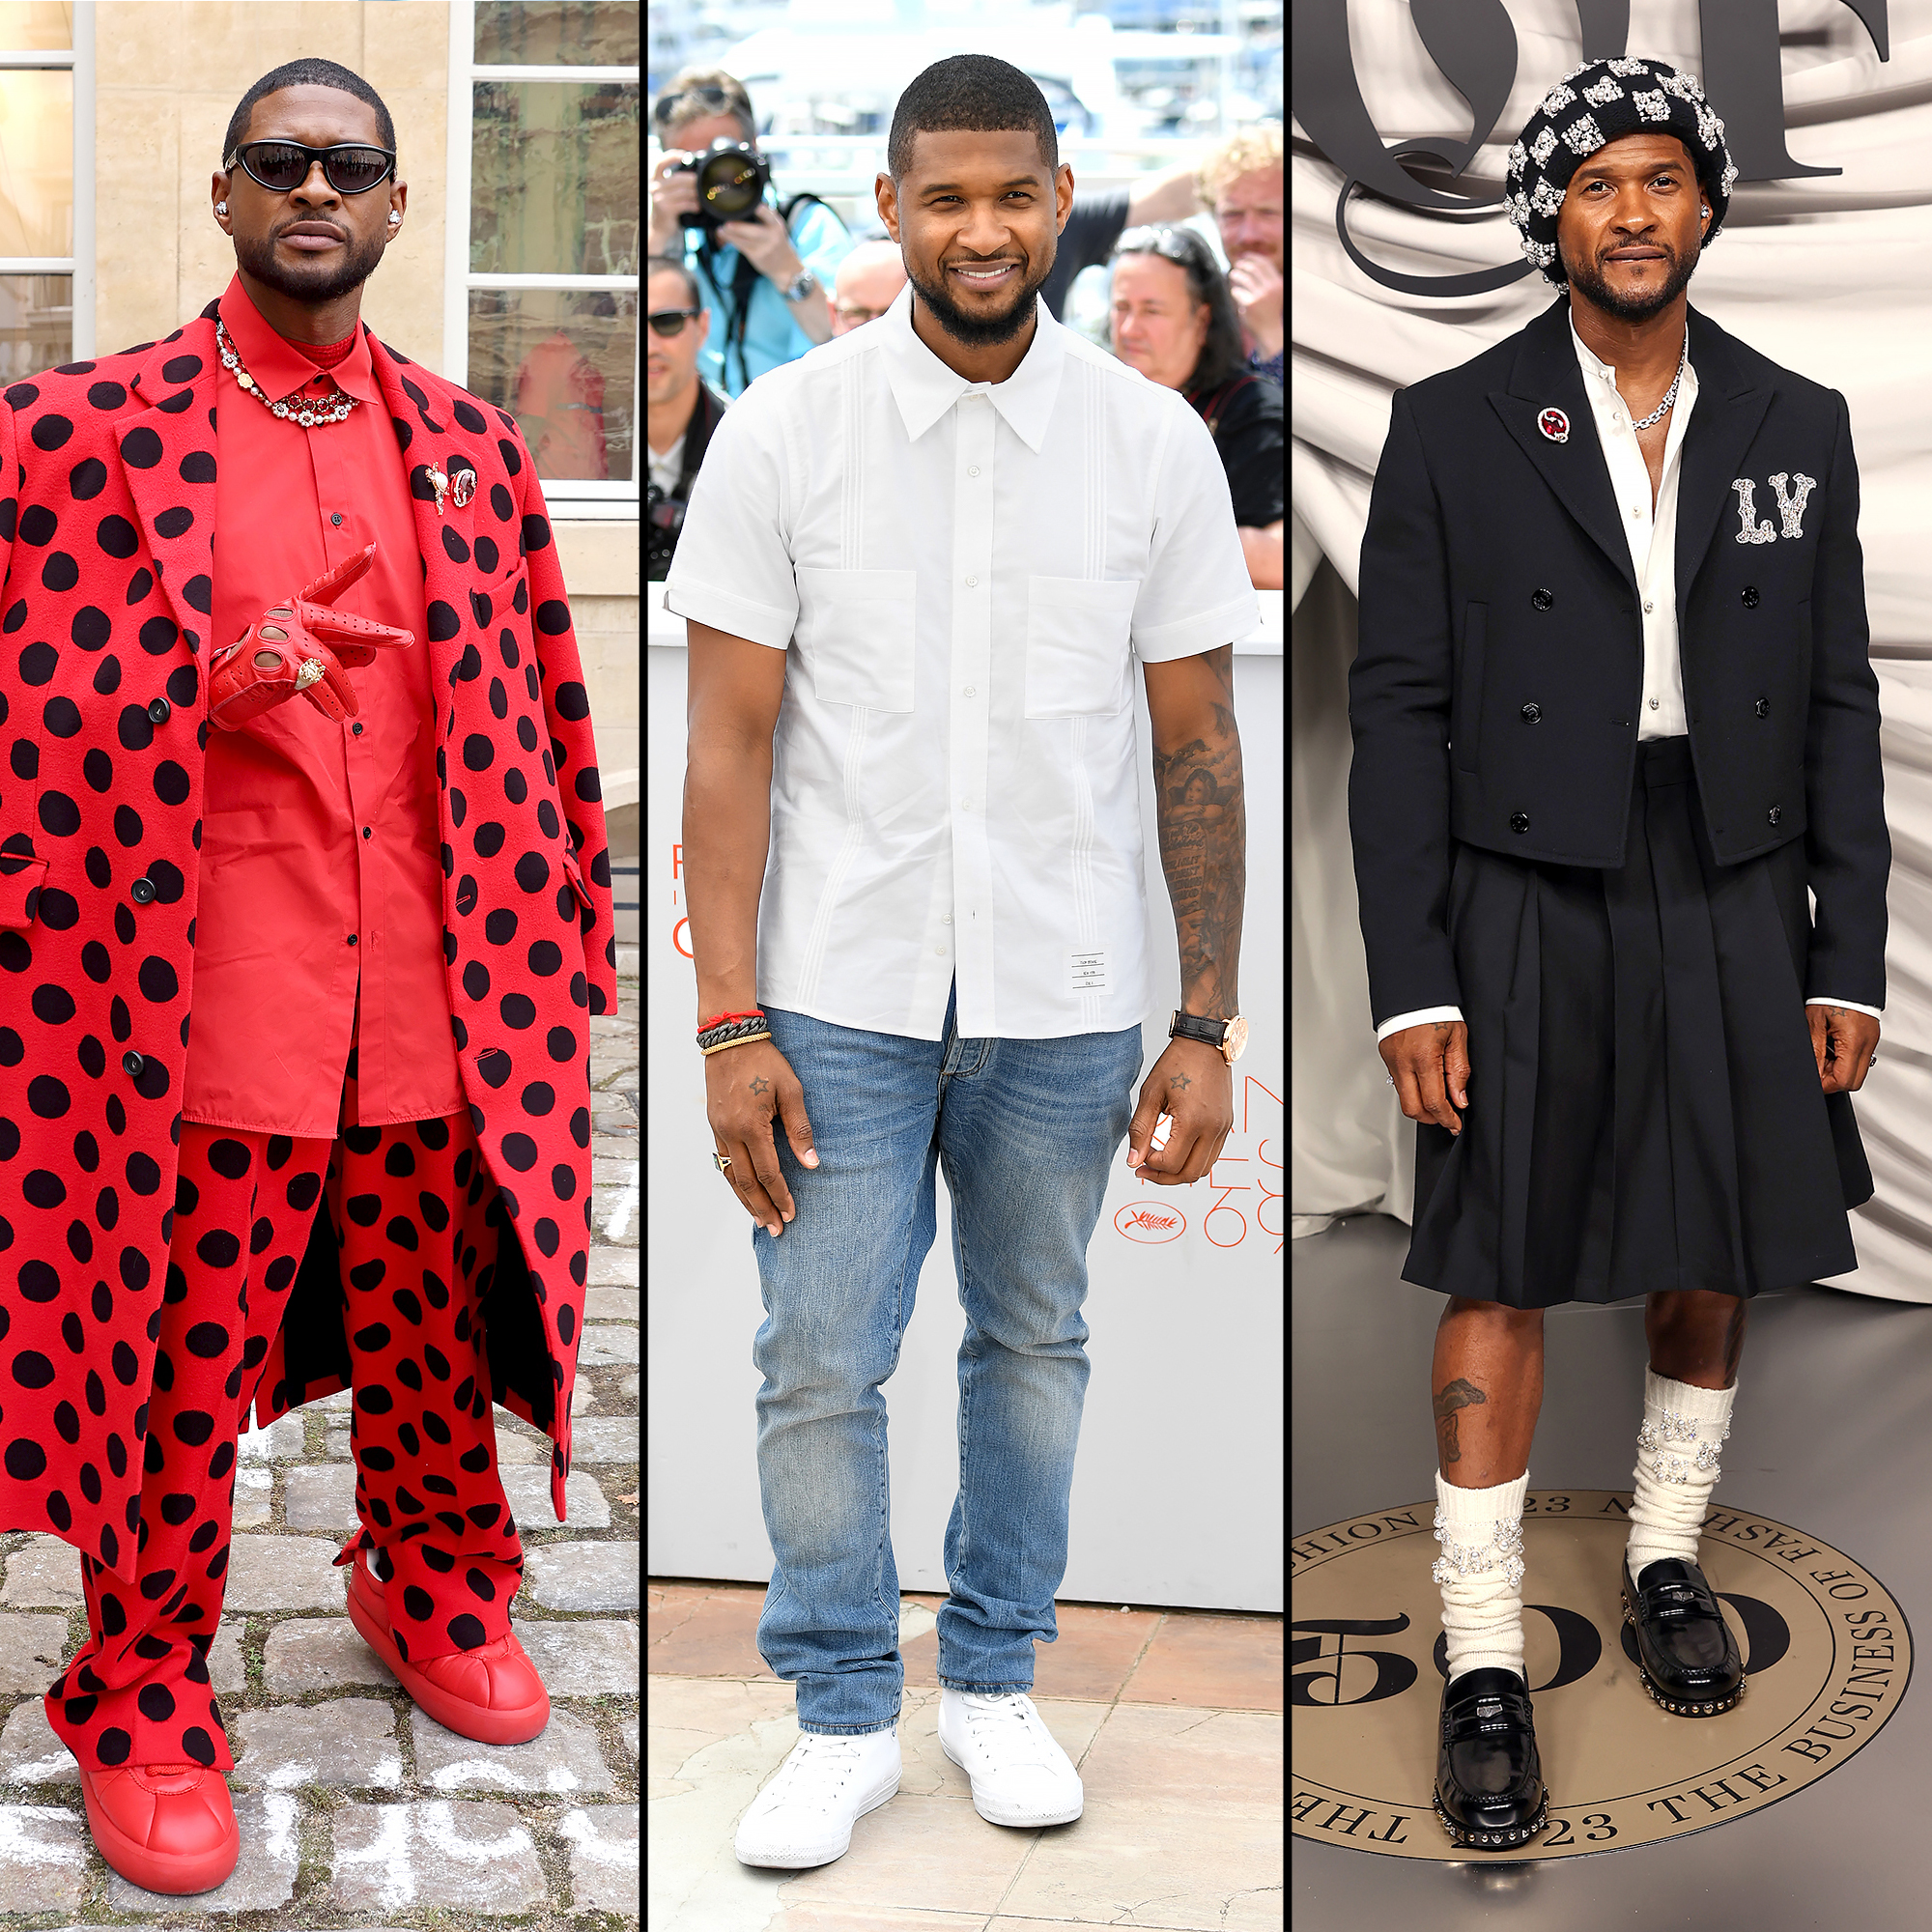 These Celebrities Are Ushering In 2023 With Style